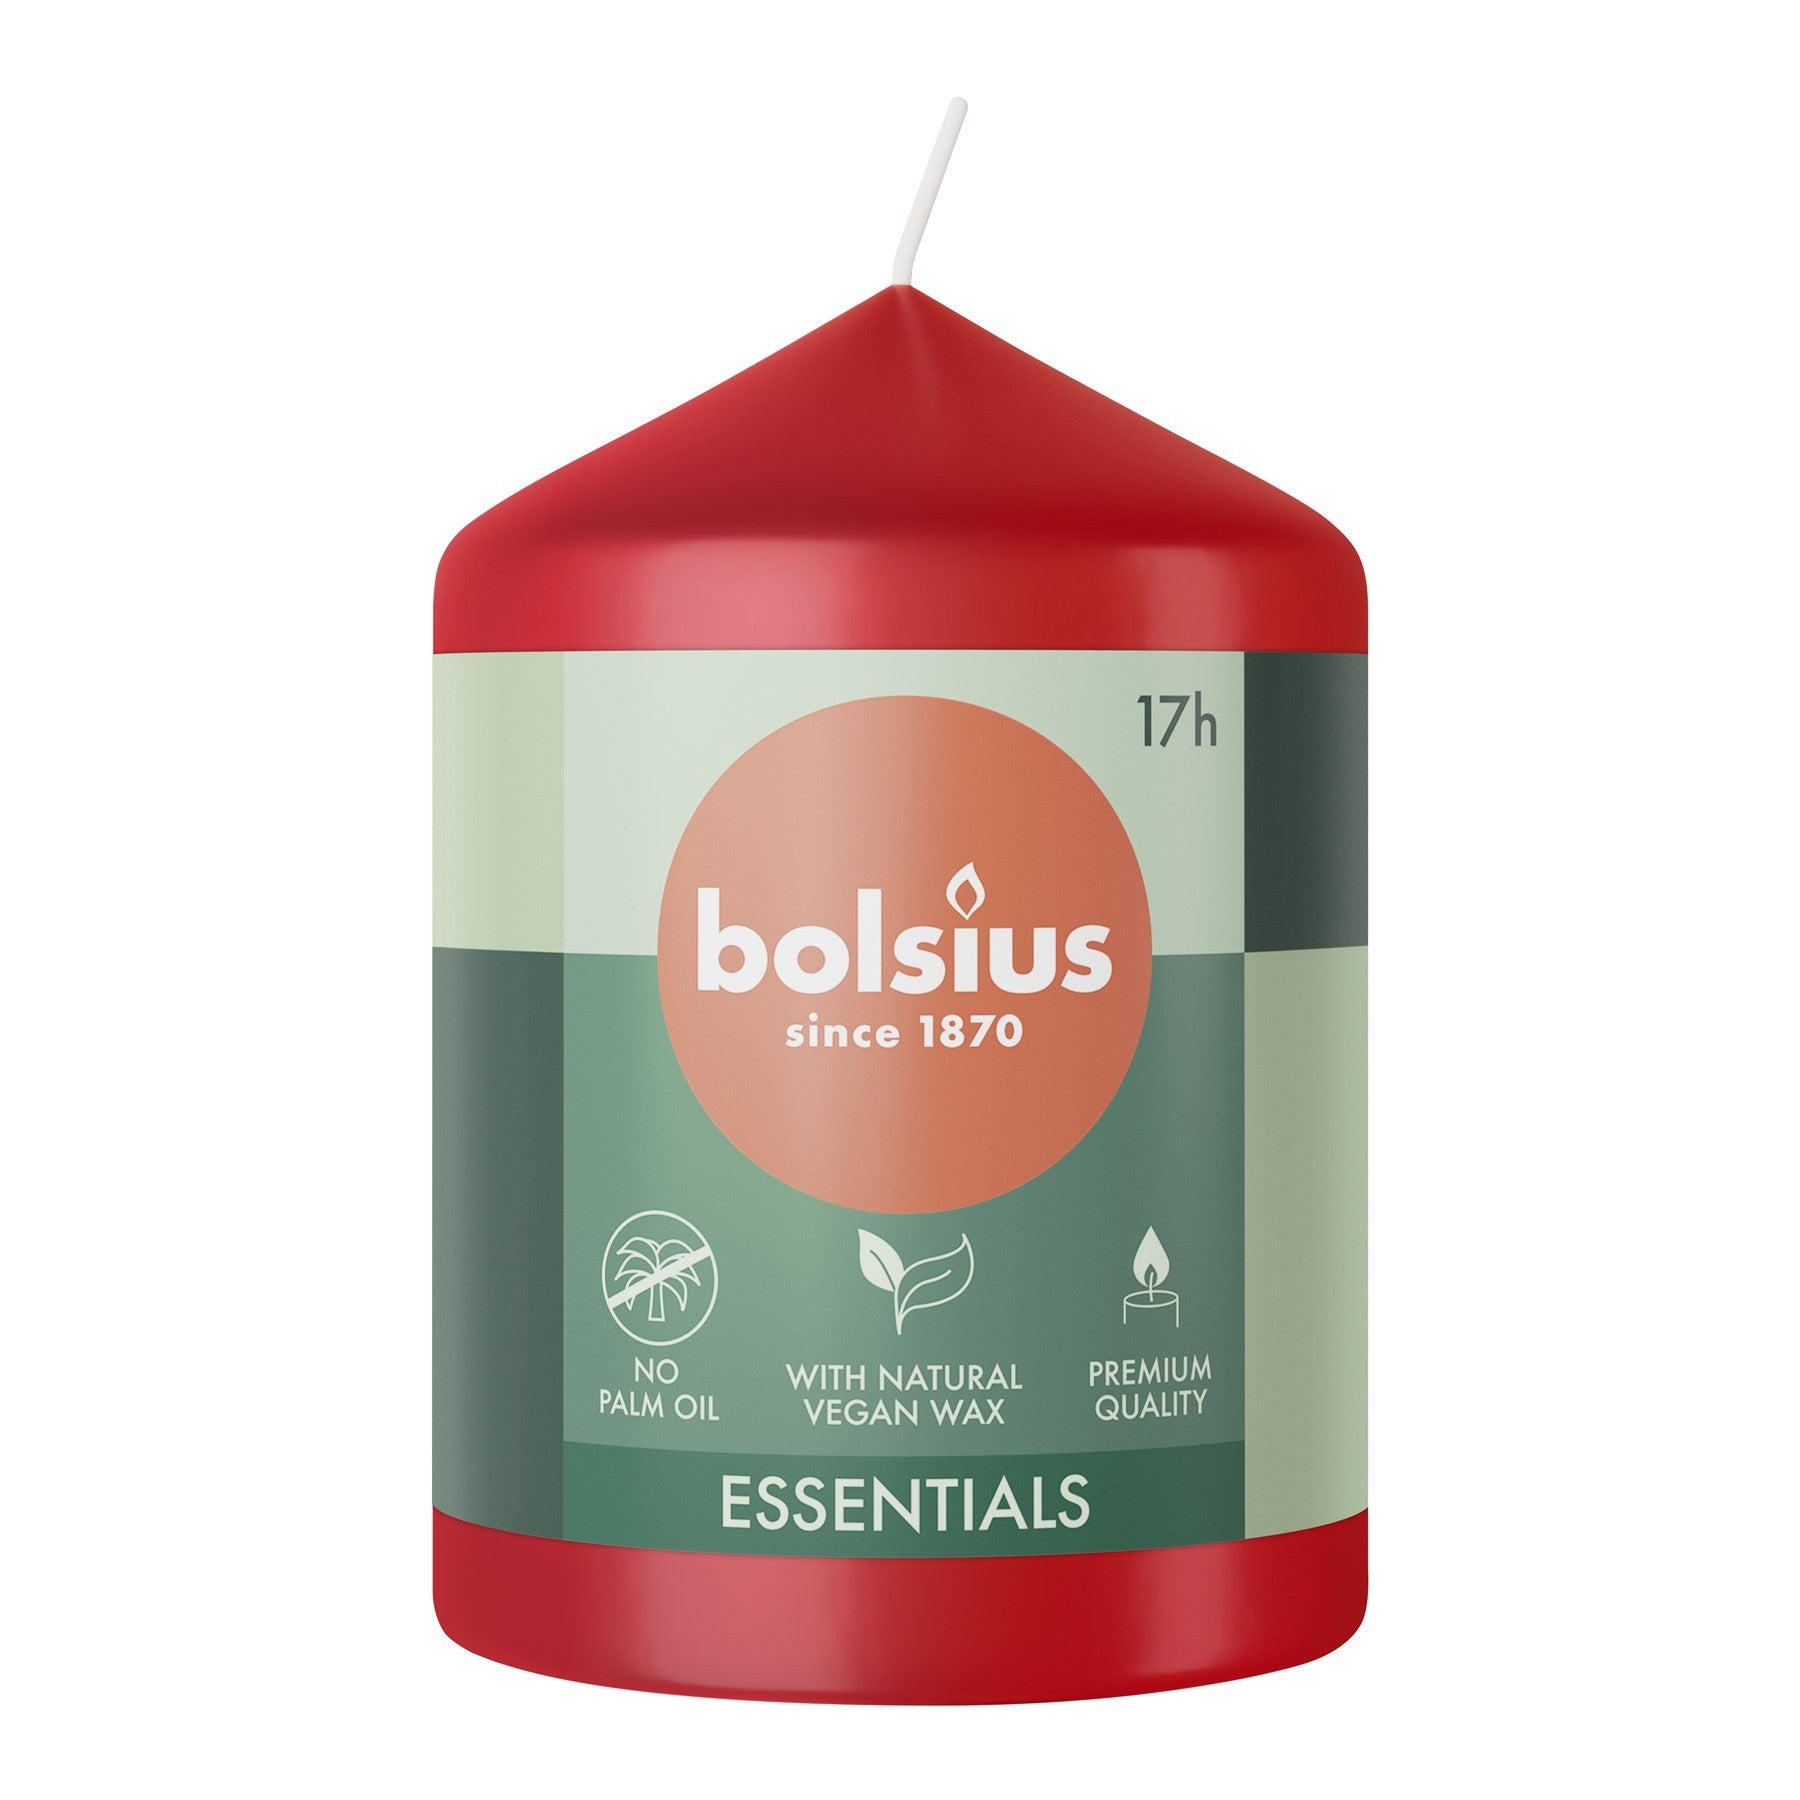 View Bolsius Delicate Red Essential Pillar Candle 80mm x 58mm information